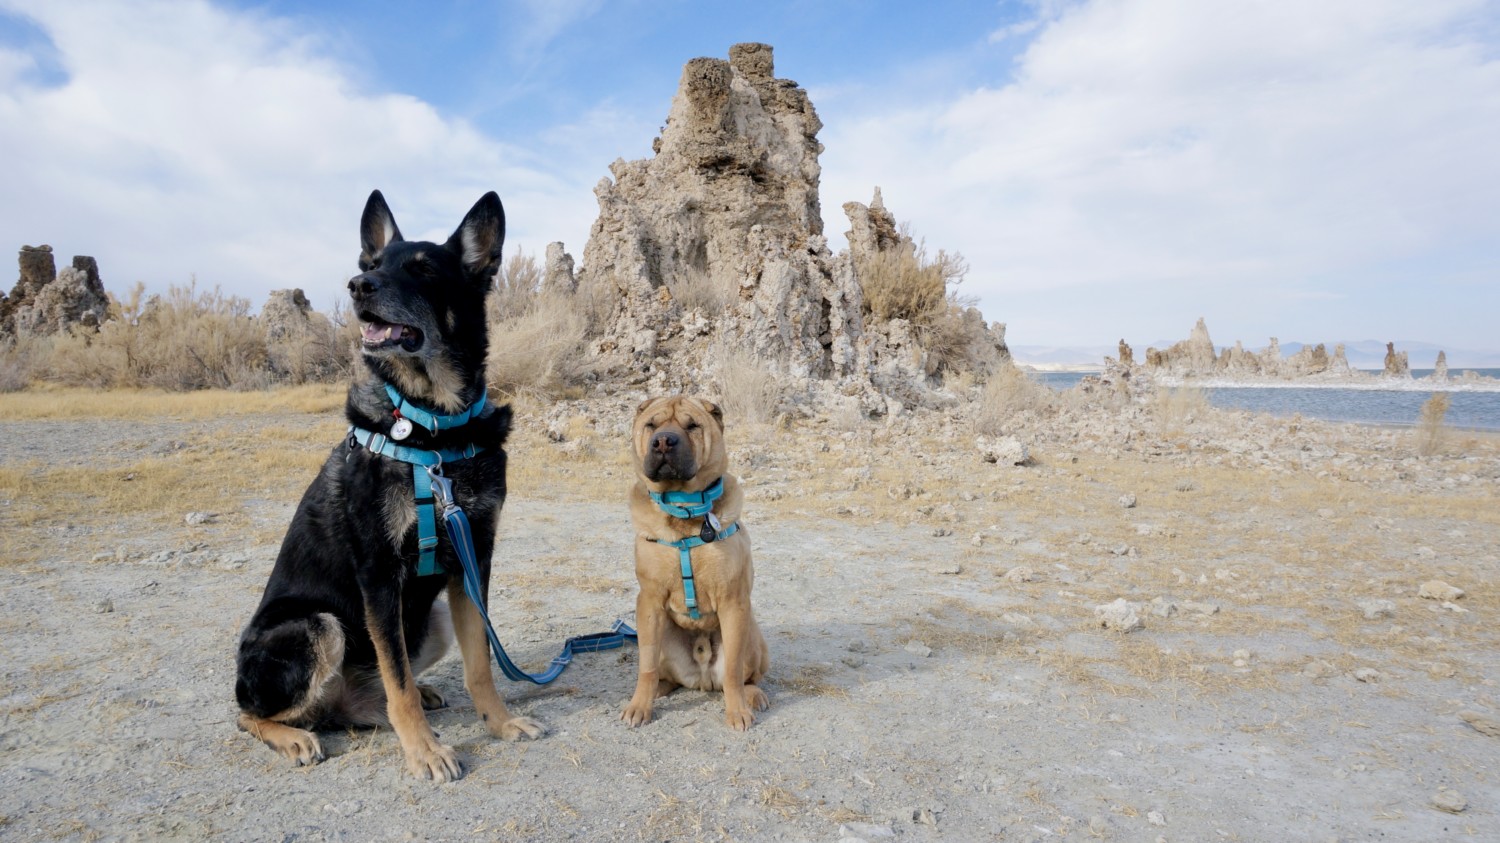 Visiting California's Mono Lake with Dogs